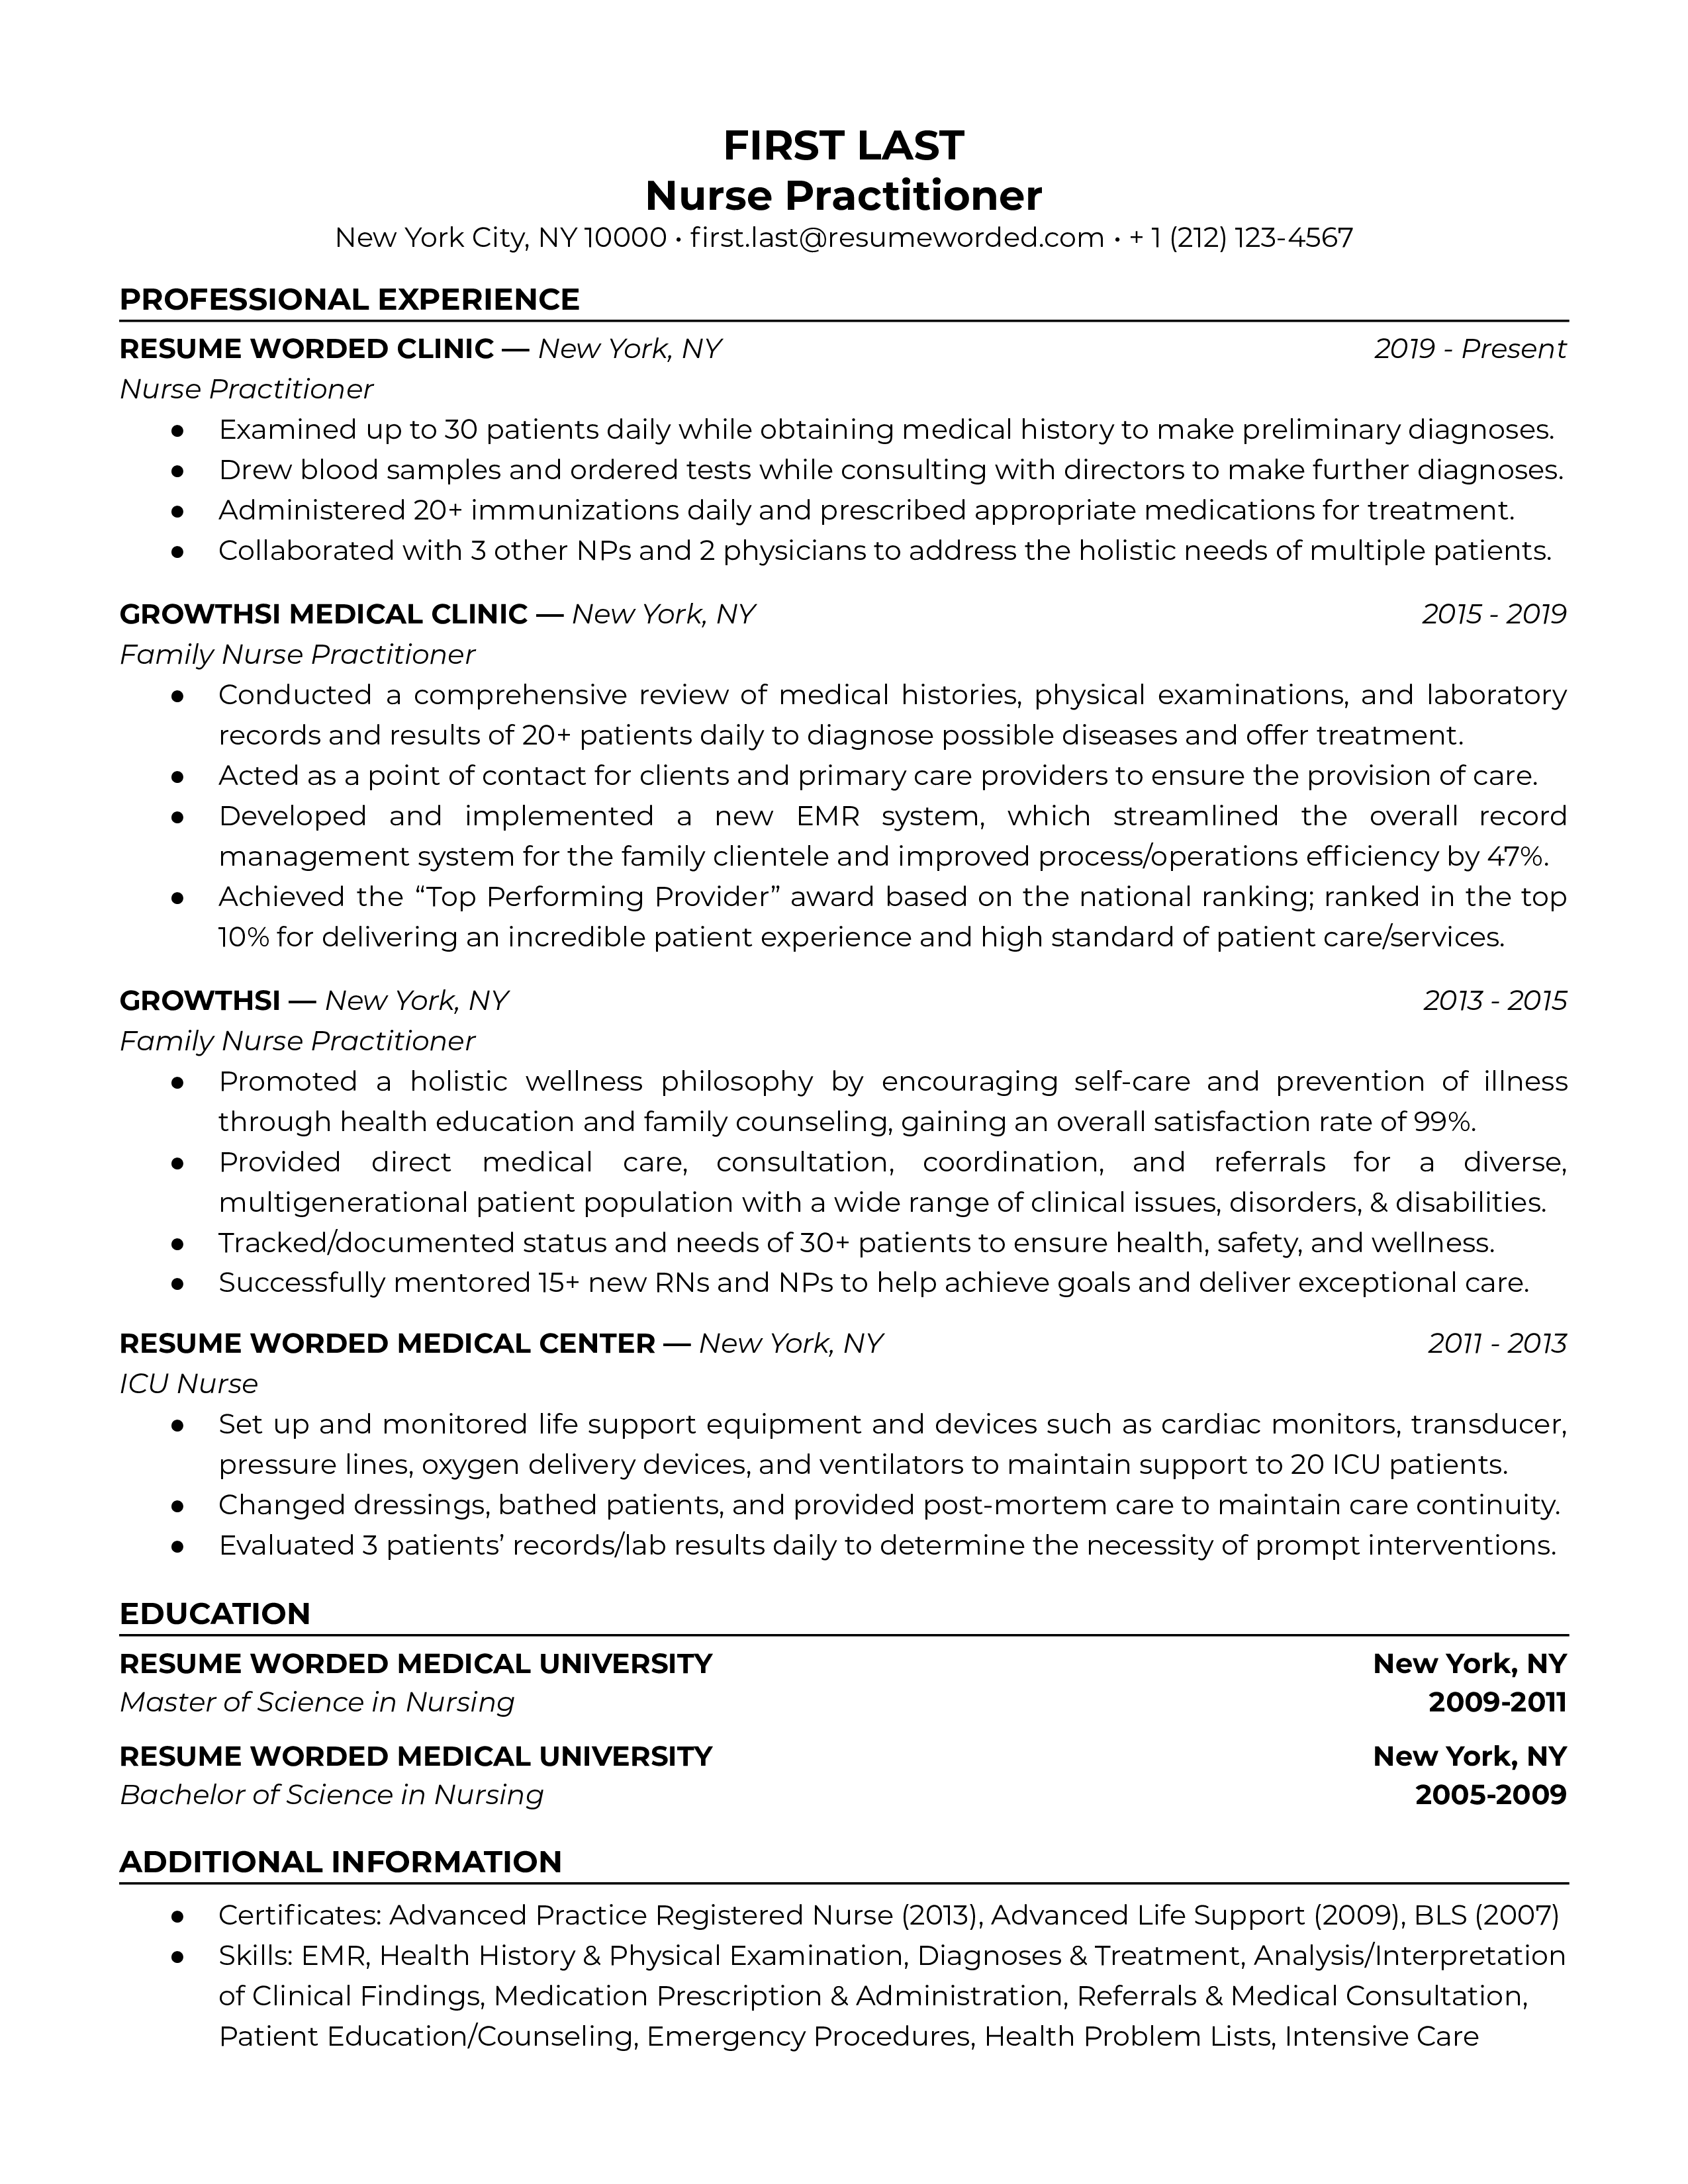 Nurse practitioner resume template sample listing the most relevant experience first to highlight important keywords